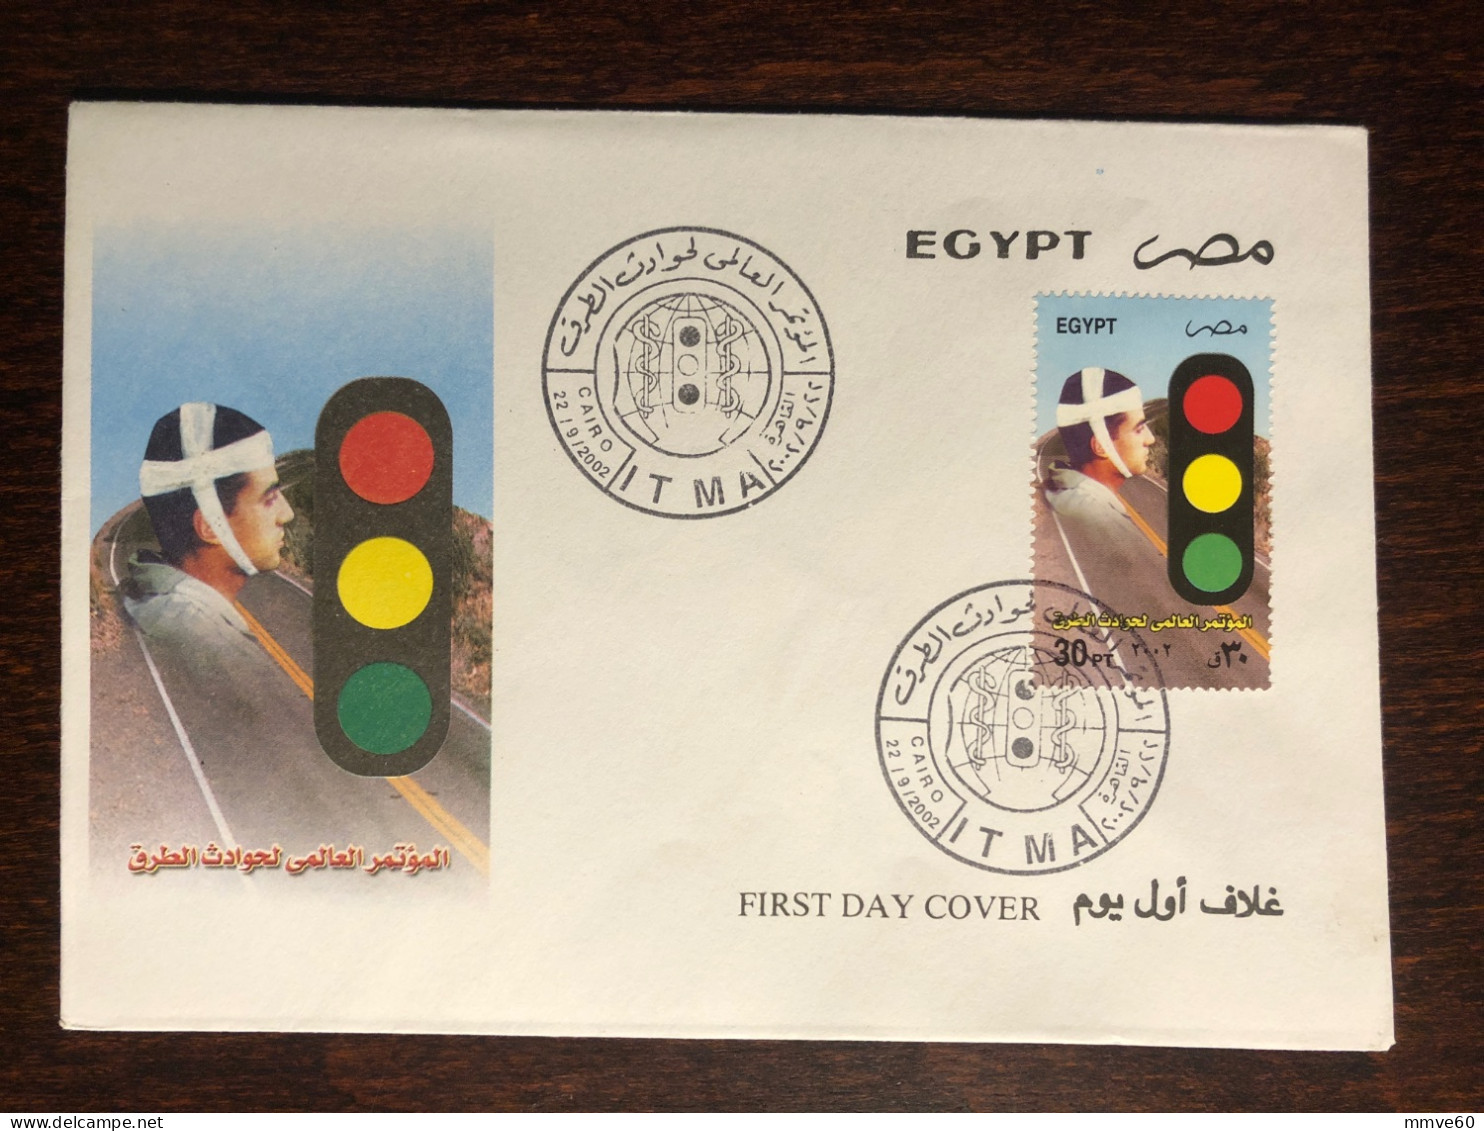 EGYPT FDC COVER 2002 YEAR TRAFFIC SAFETY HEALTH MEDICINE - Covers & Documents